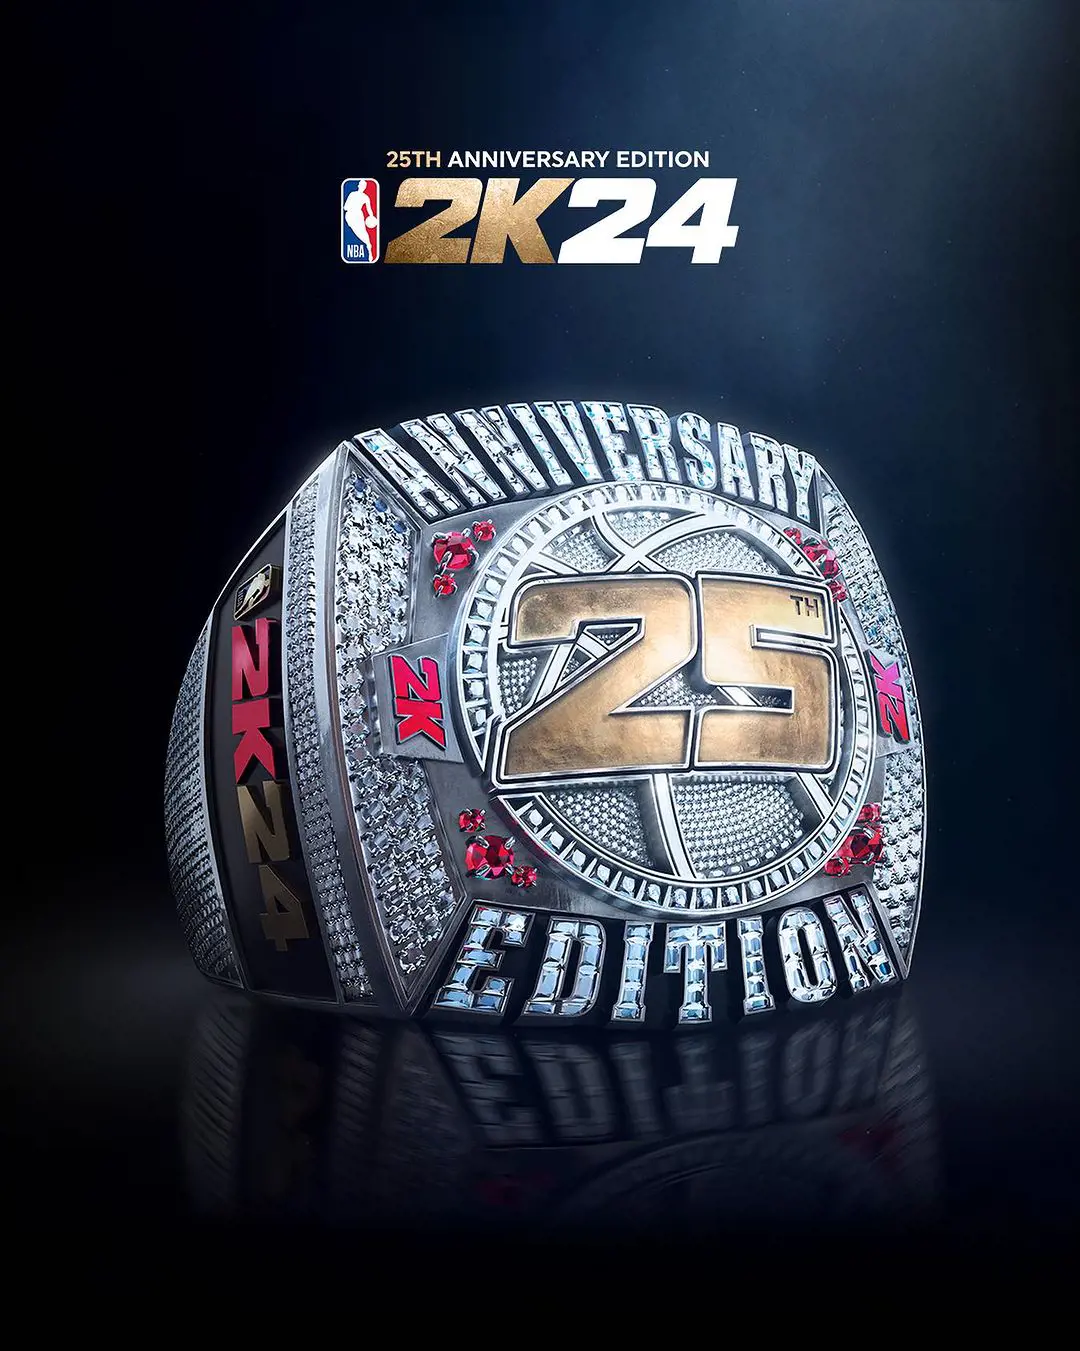 Anniversary edition of the game is a limited version which shall additional features for the gamers thus anniversary edition showcases NBA championship ring as its cover